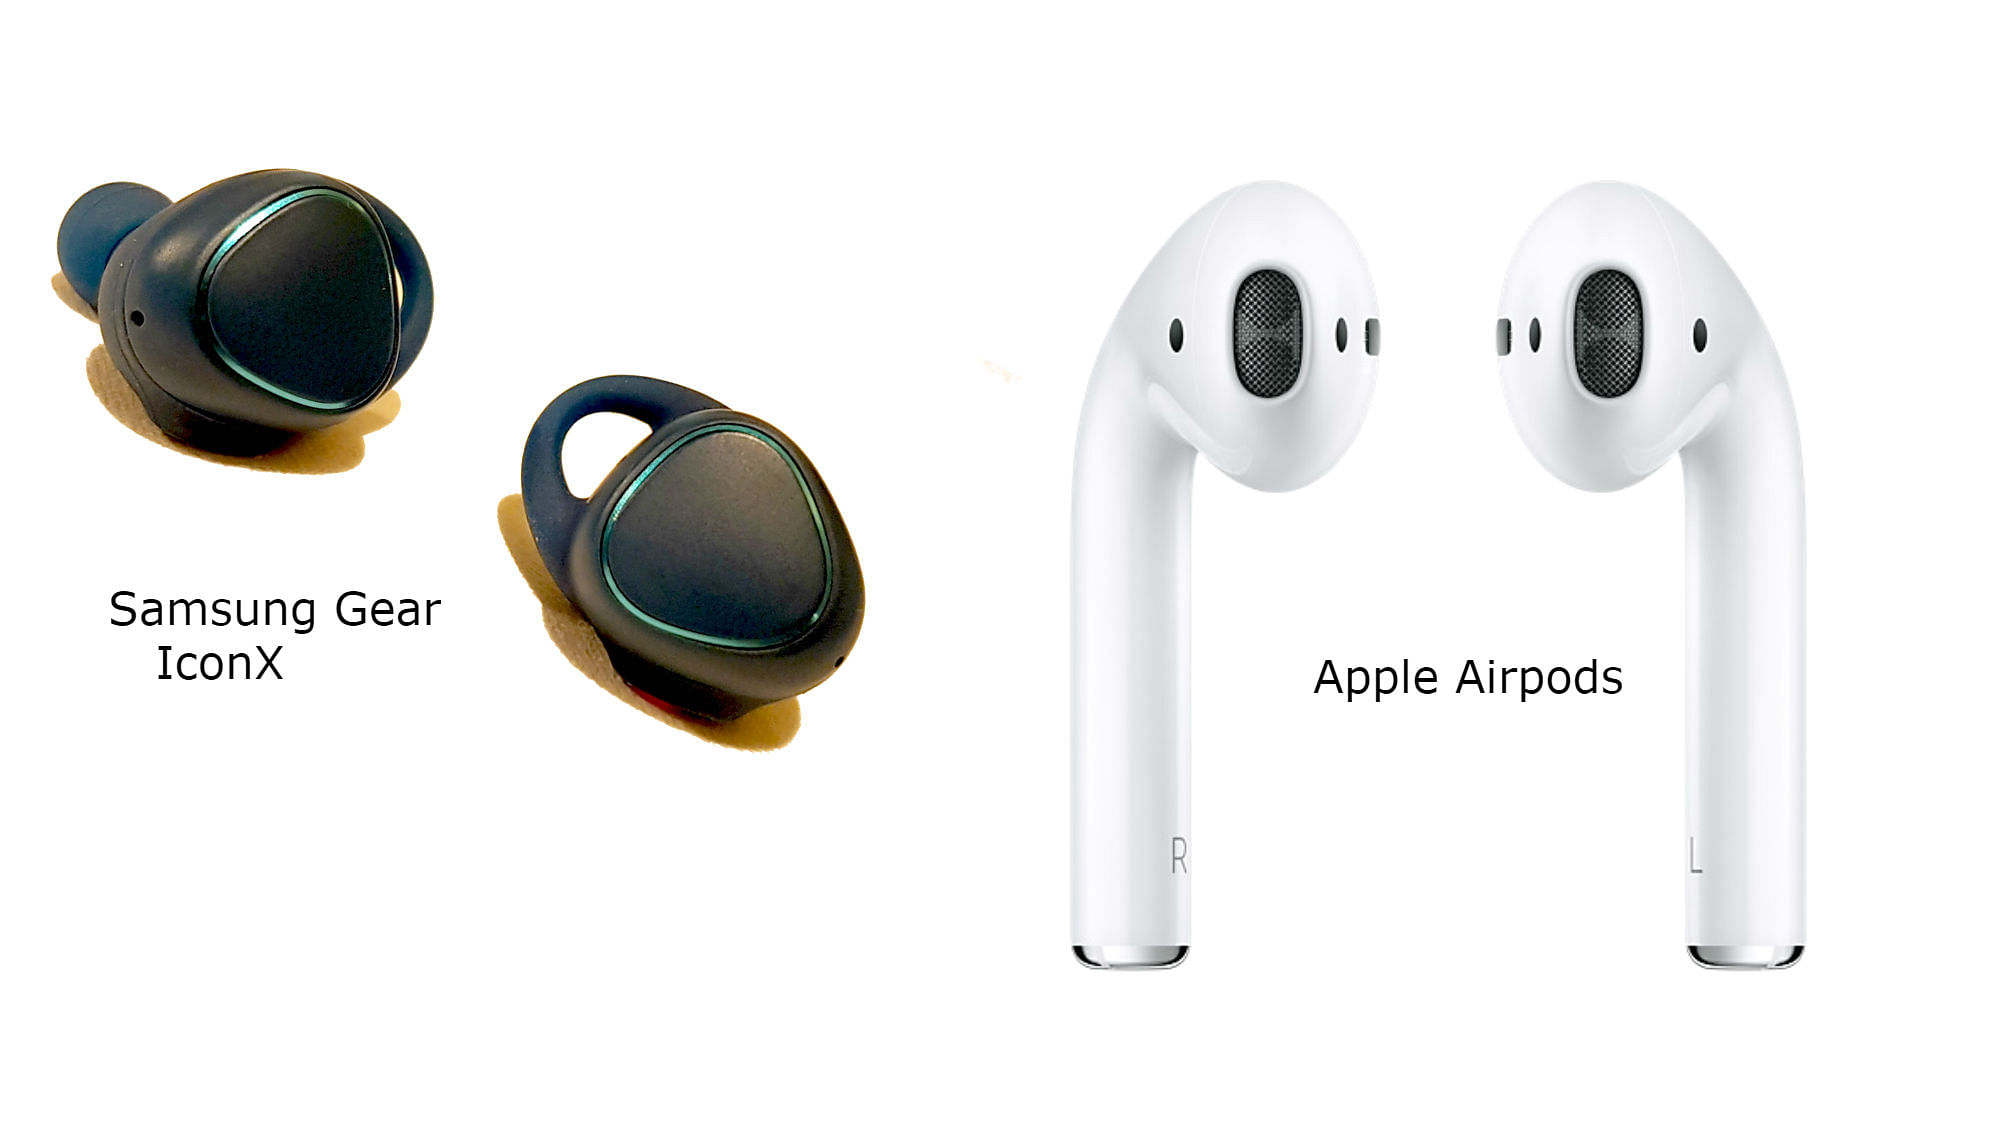 

Samsung Gear X (left) and Apple Airpods (right) (Photo: <b>The Quint</b>)